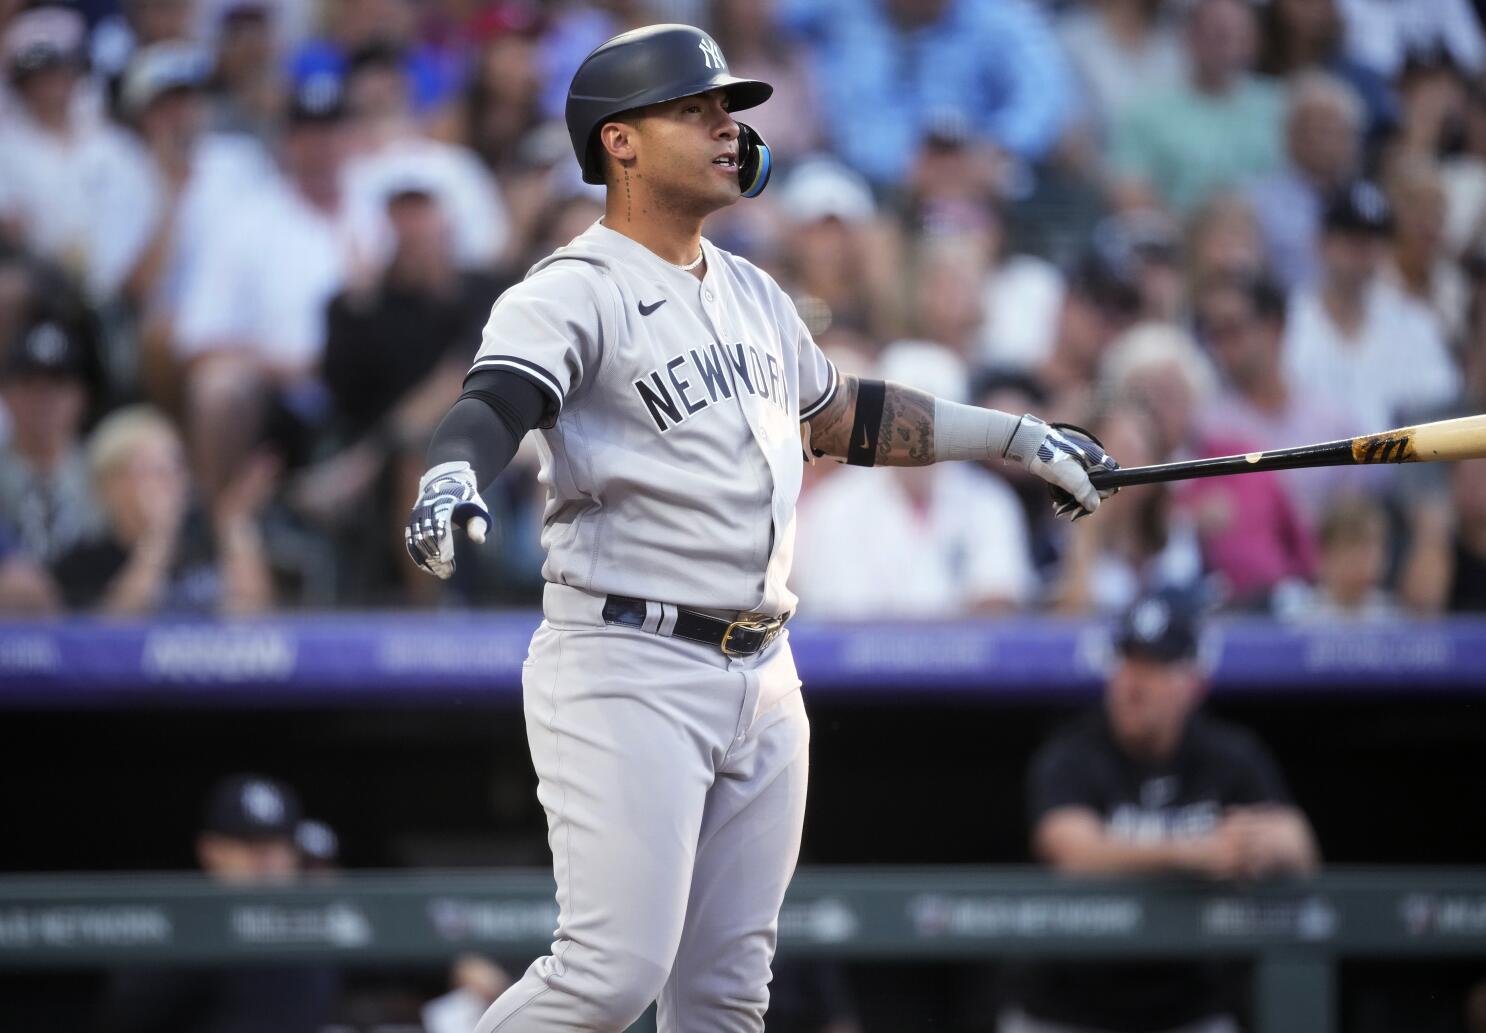 Ex-Yankees slugger resigns from coaching job after just 2 months